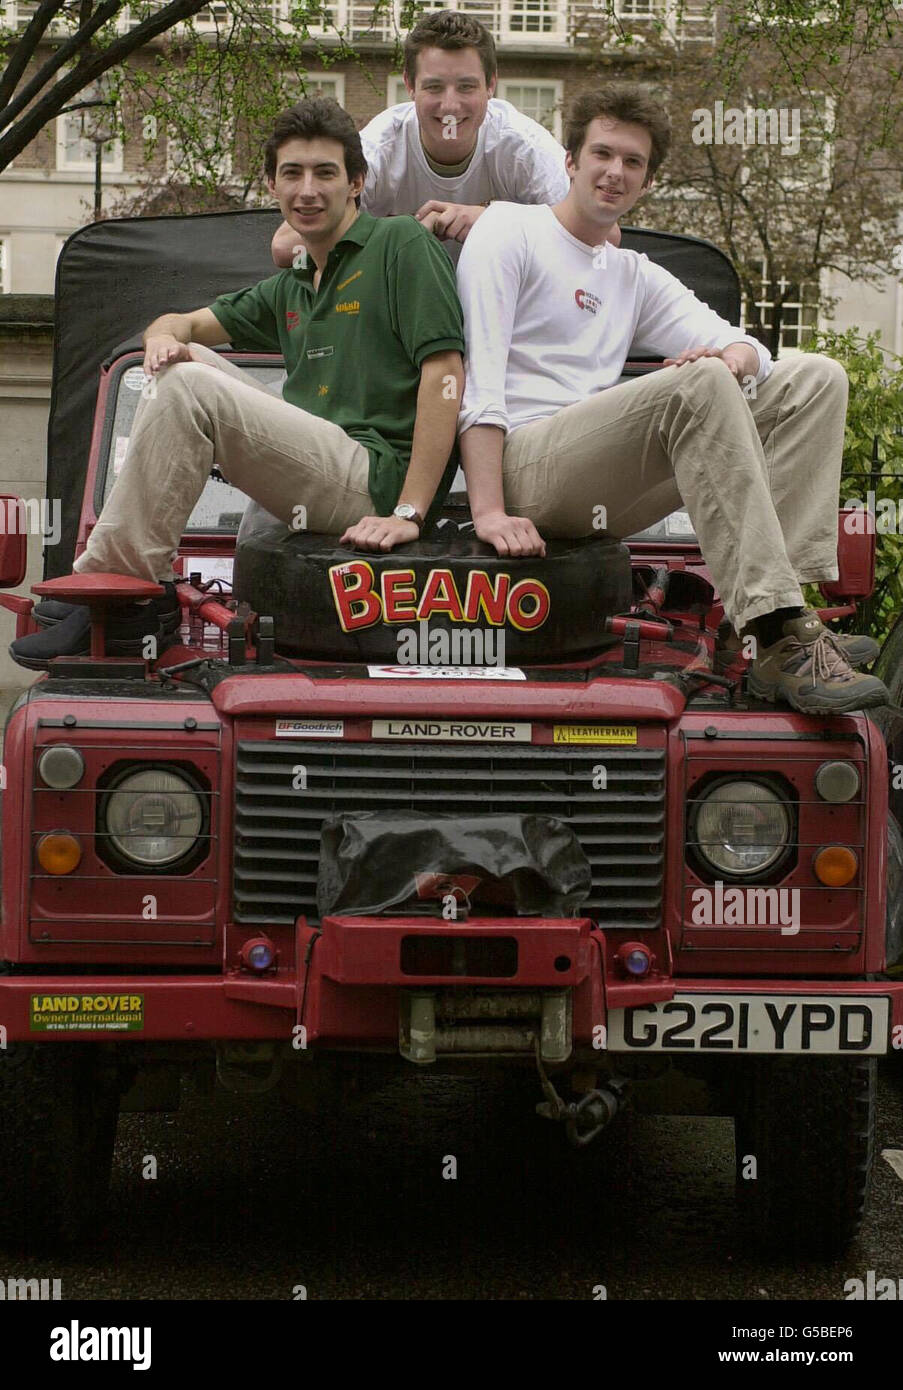 (L-R) Richard McCallum, Rollo De -Sausmarez and Mark Briant, all aged 23 and from Oxford who are leaving London to drive in a land rover to China. The journey sponsored by DC Thompson's Beano comic is expected to take 5 months. * and to take them through 17 countries. They are raising money for the ITDG practical ideas for poverty charity. Stock Photo